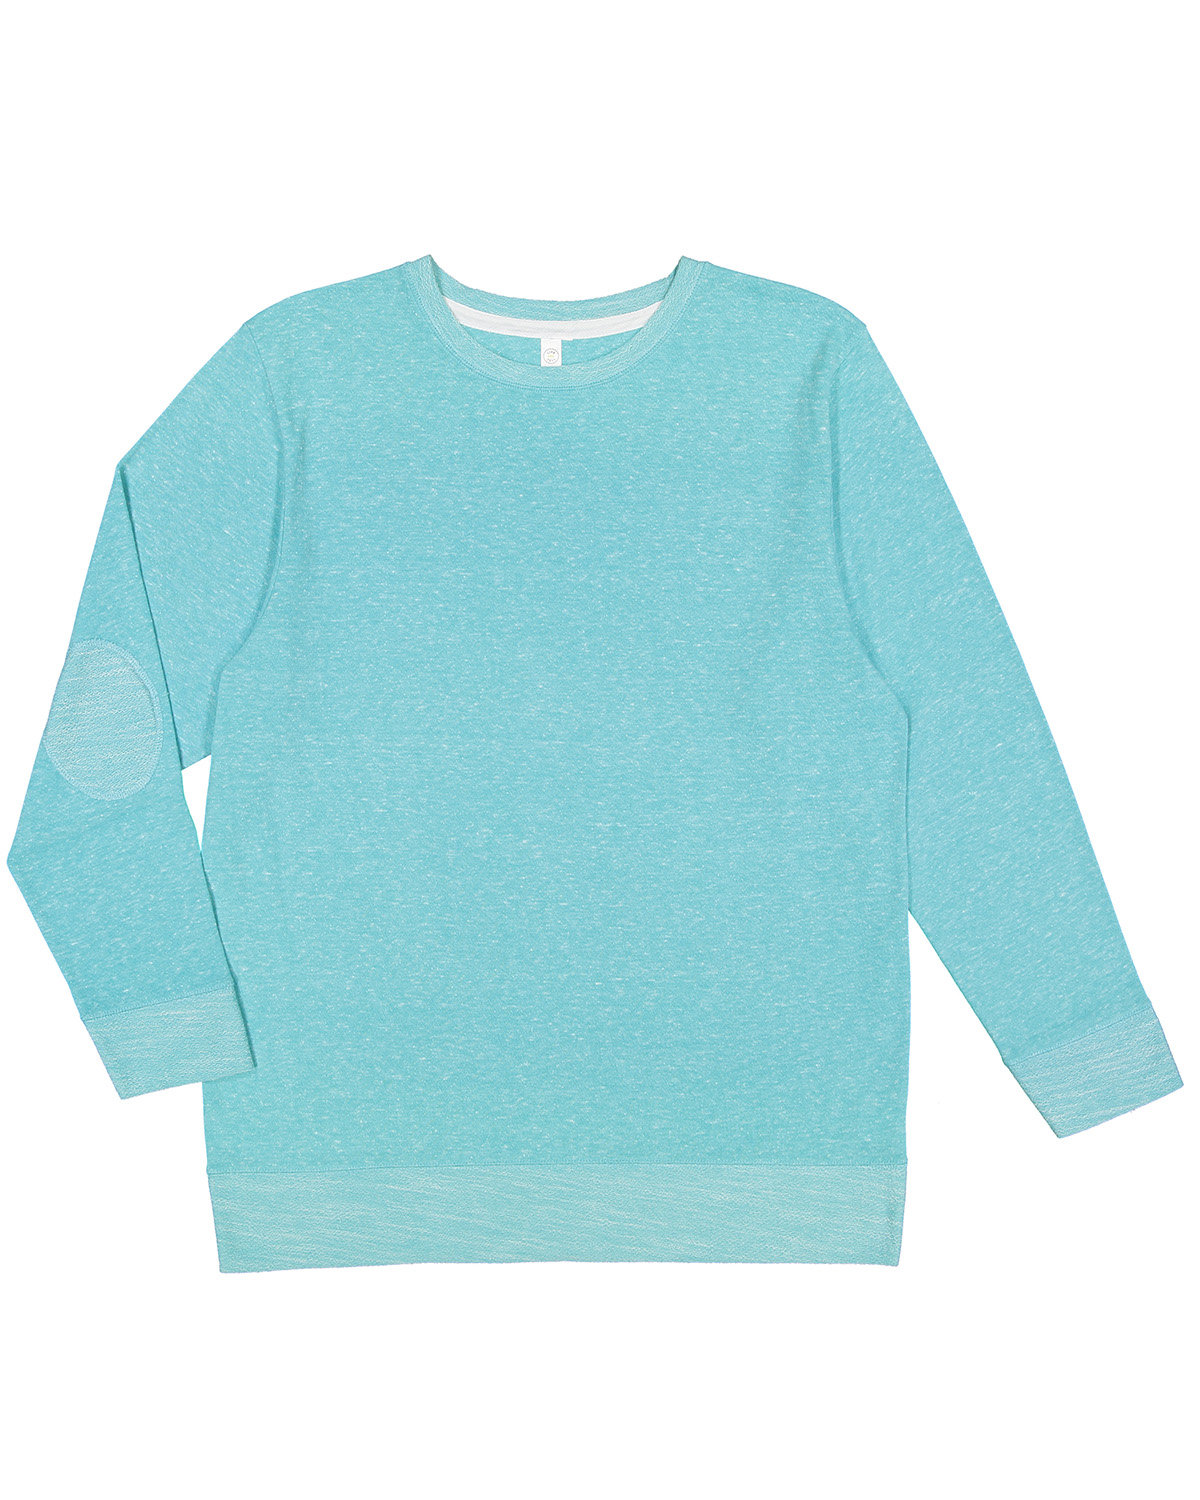 Rabbit Skins Toddler Harborside M/élange French Terry Long Sleeve Crew Neck with Elbow Patches